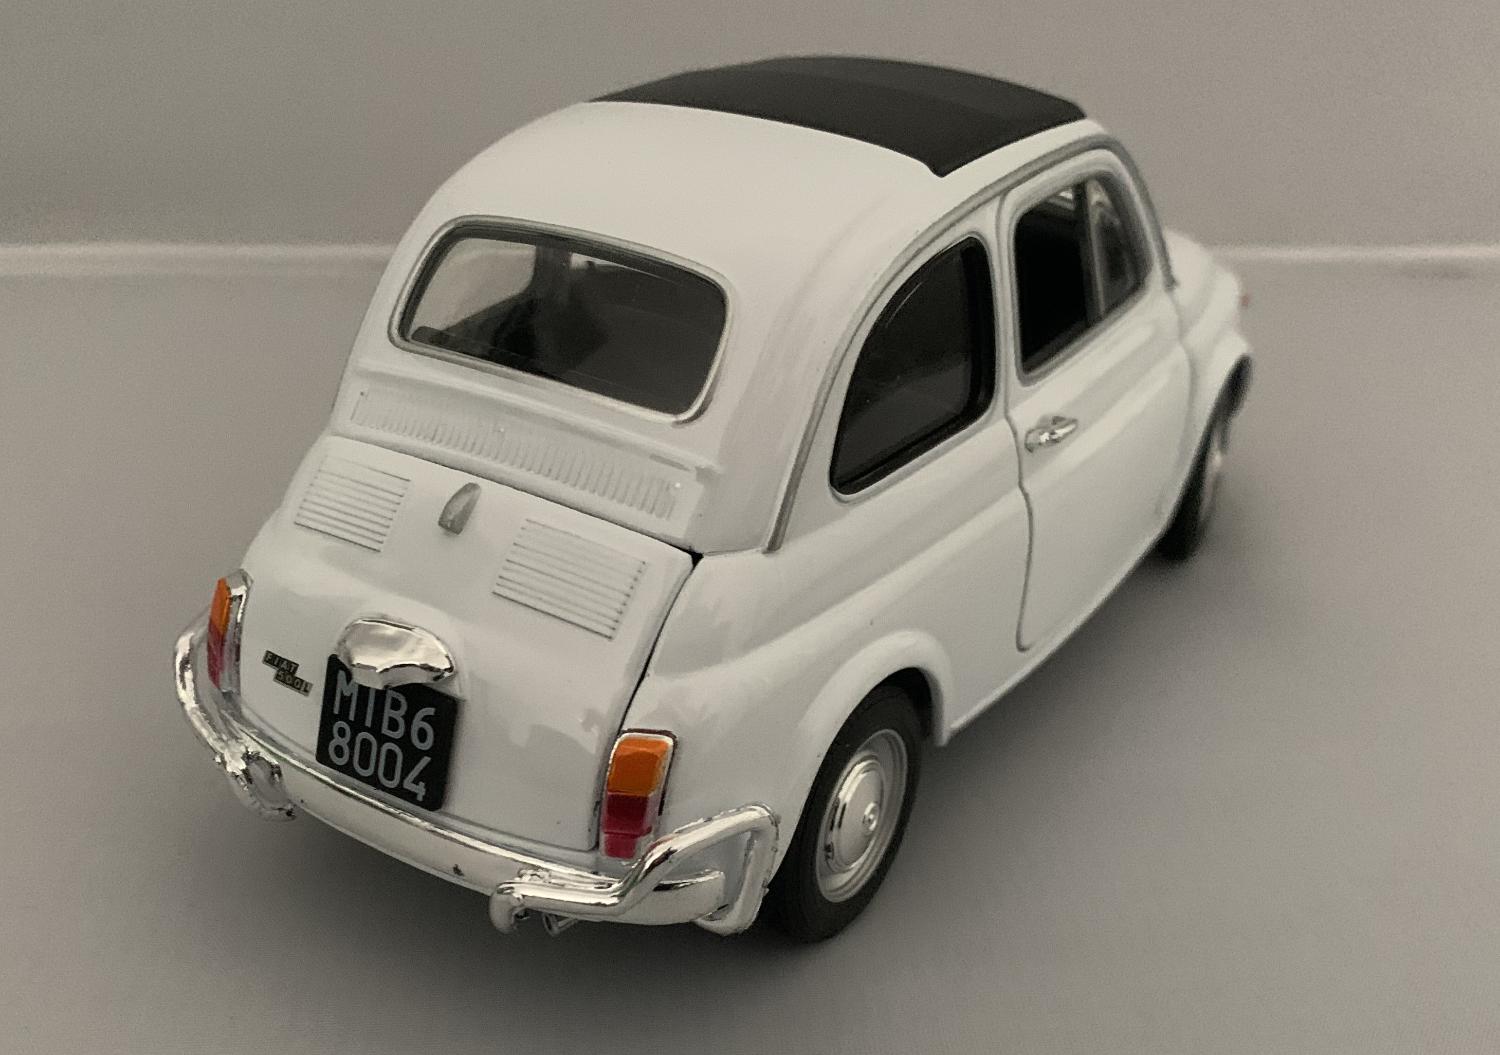 An excellent scale model of the Fiat 500 Nuova with high level of detail throughout, all authentically recreated. Model is presented in a window display box.